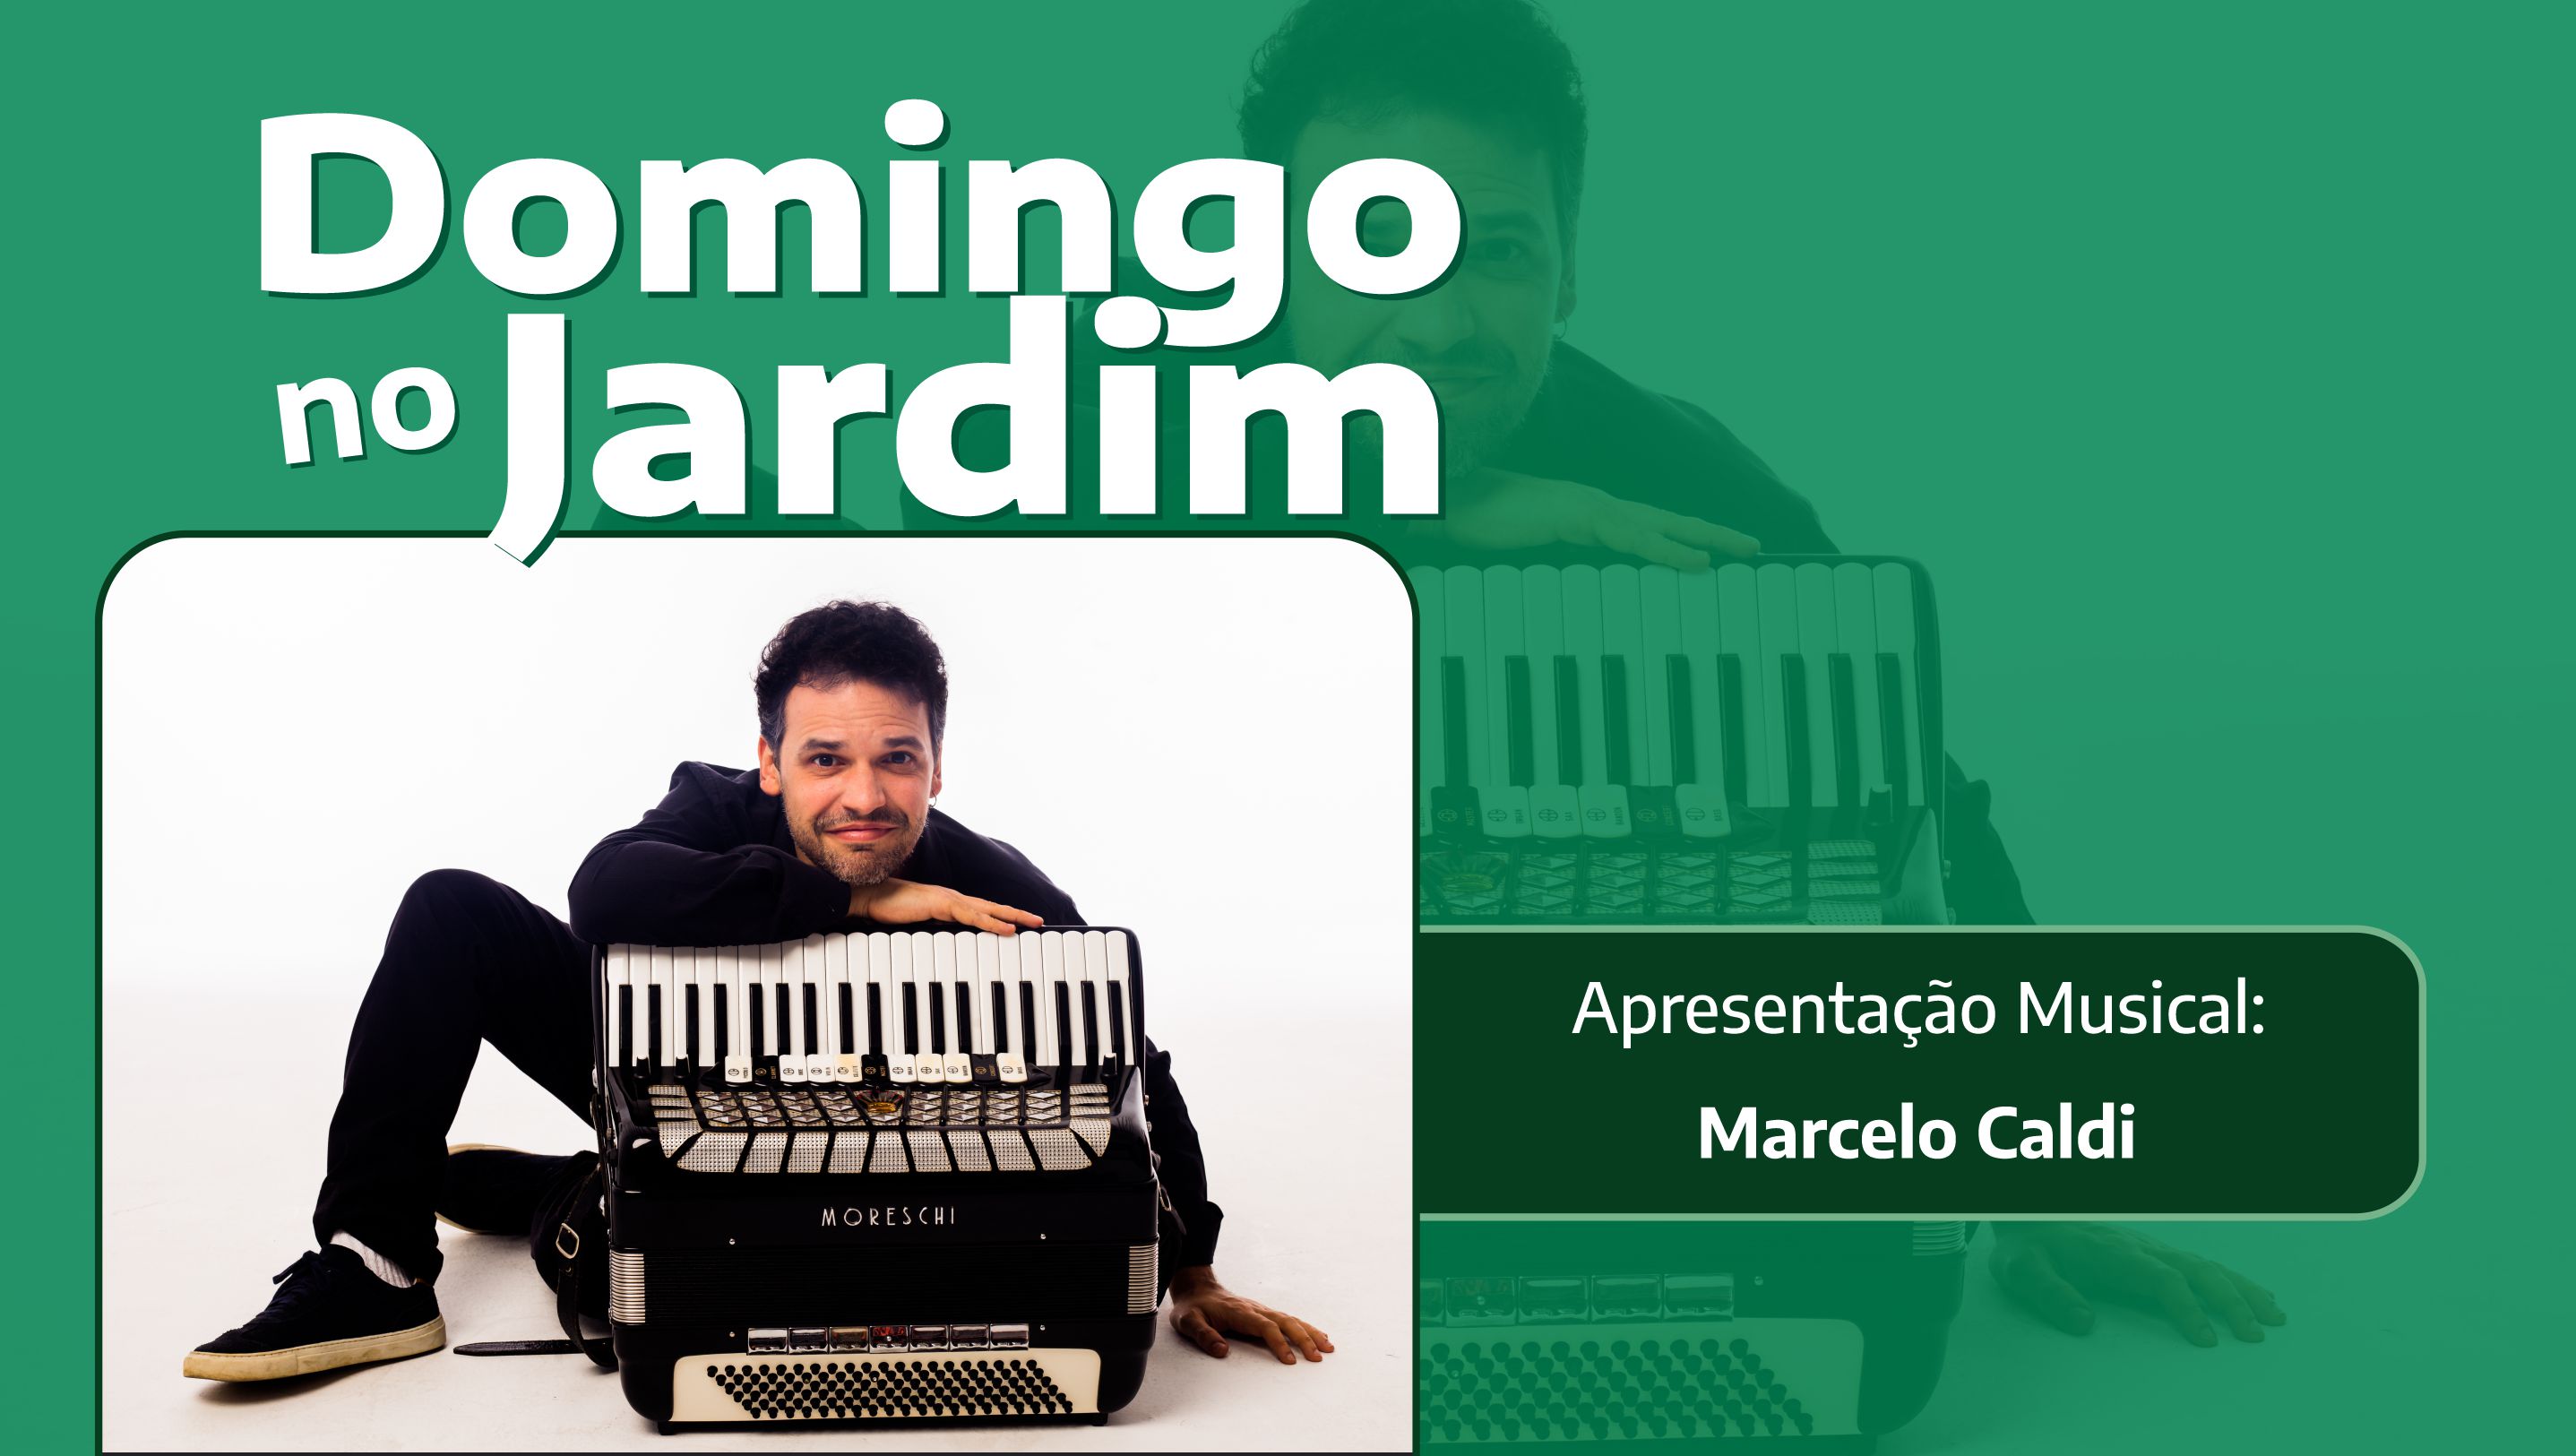 Marcelo Caldi is the musical attraction of Domingo no Jardim on April 28th